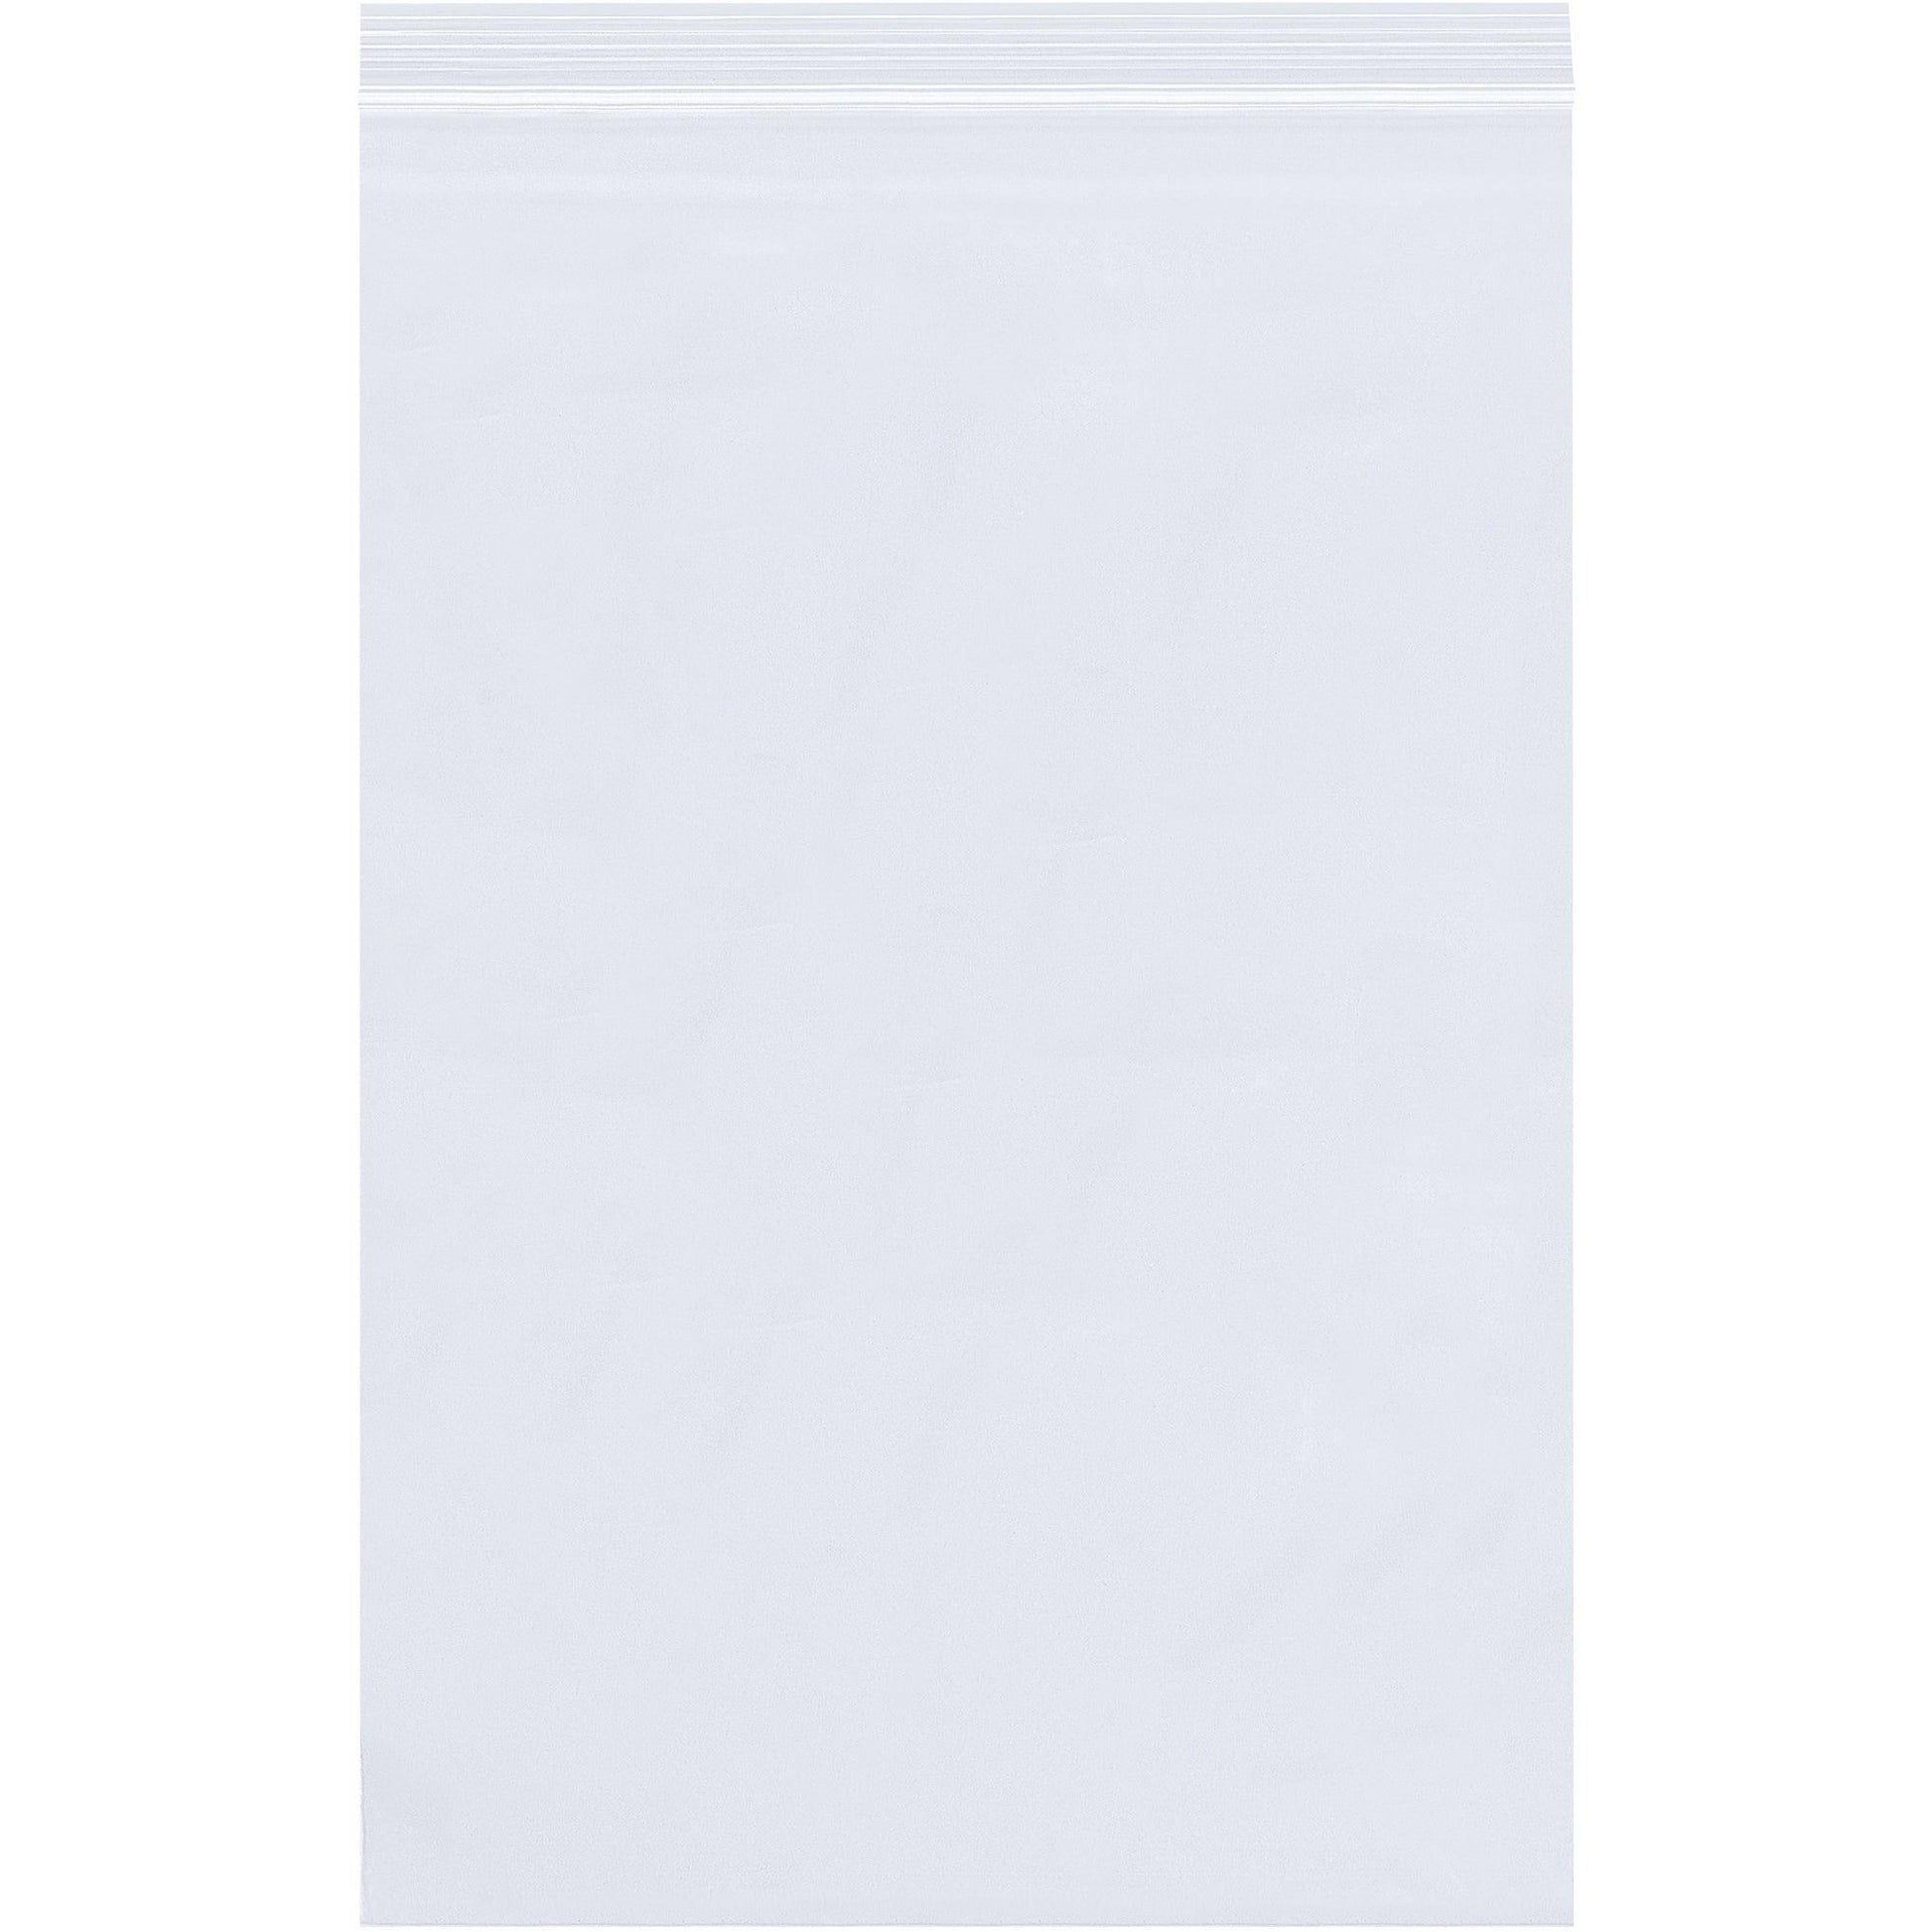 14 x 18" - 2 Mil Reclosable Poly Bags - PB3680